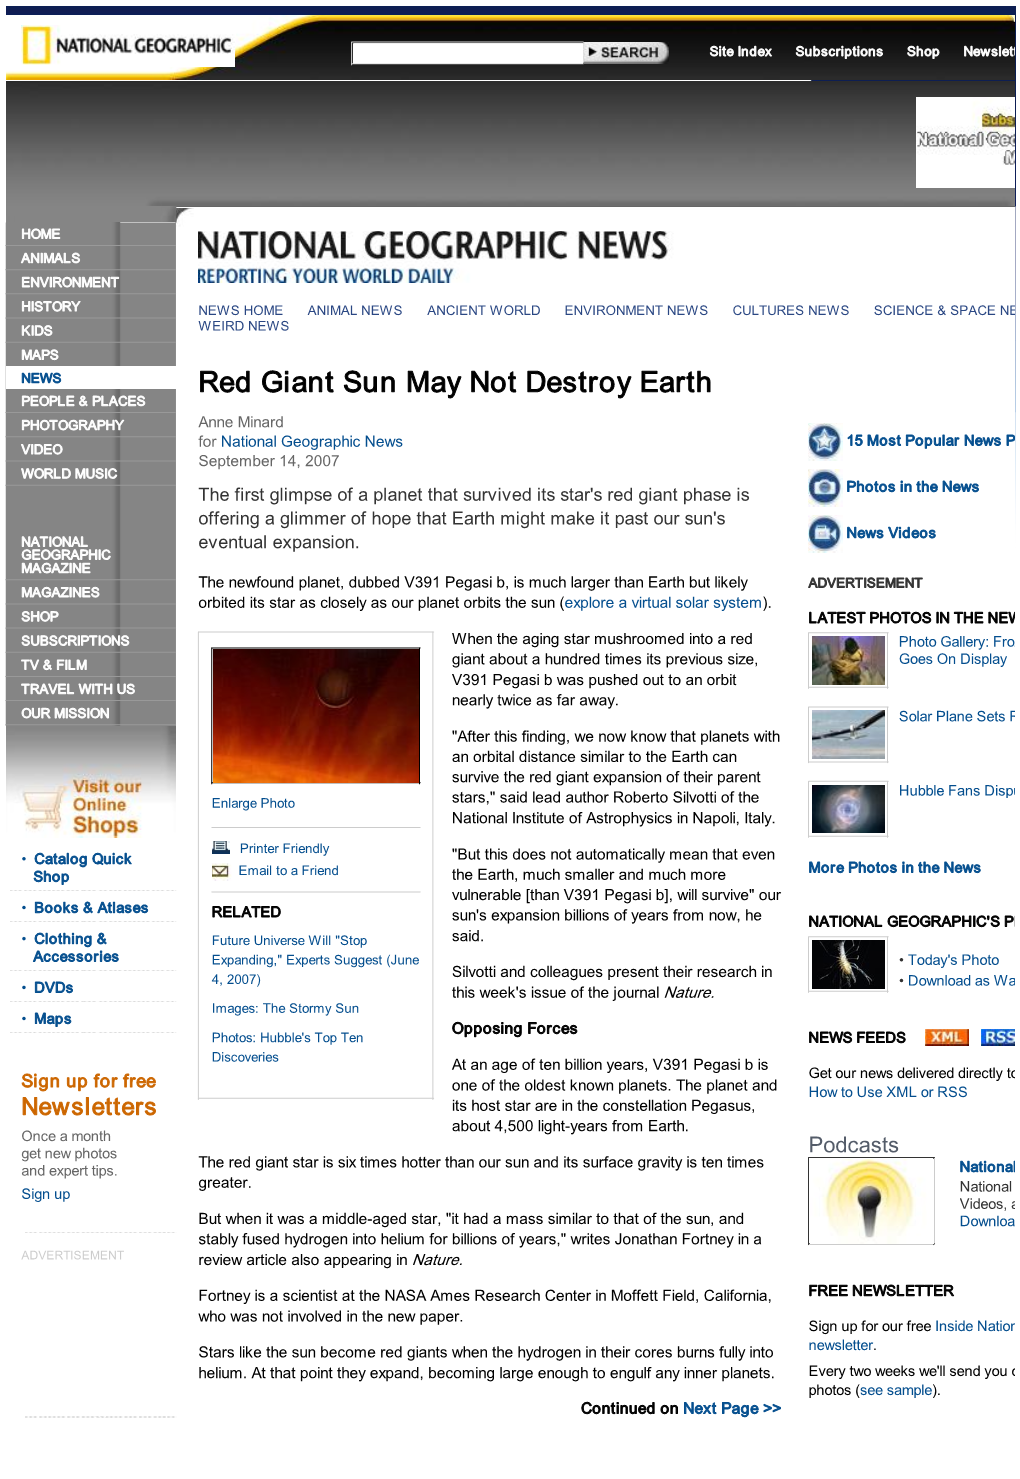 Red Giant Sun May Not Destroy Earth